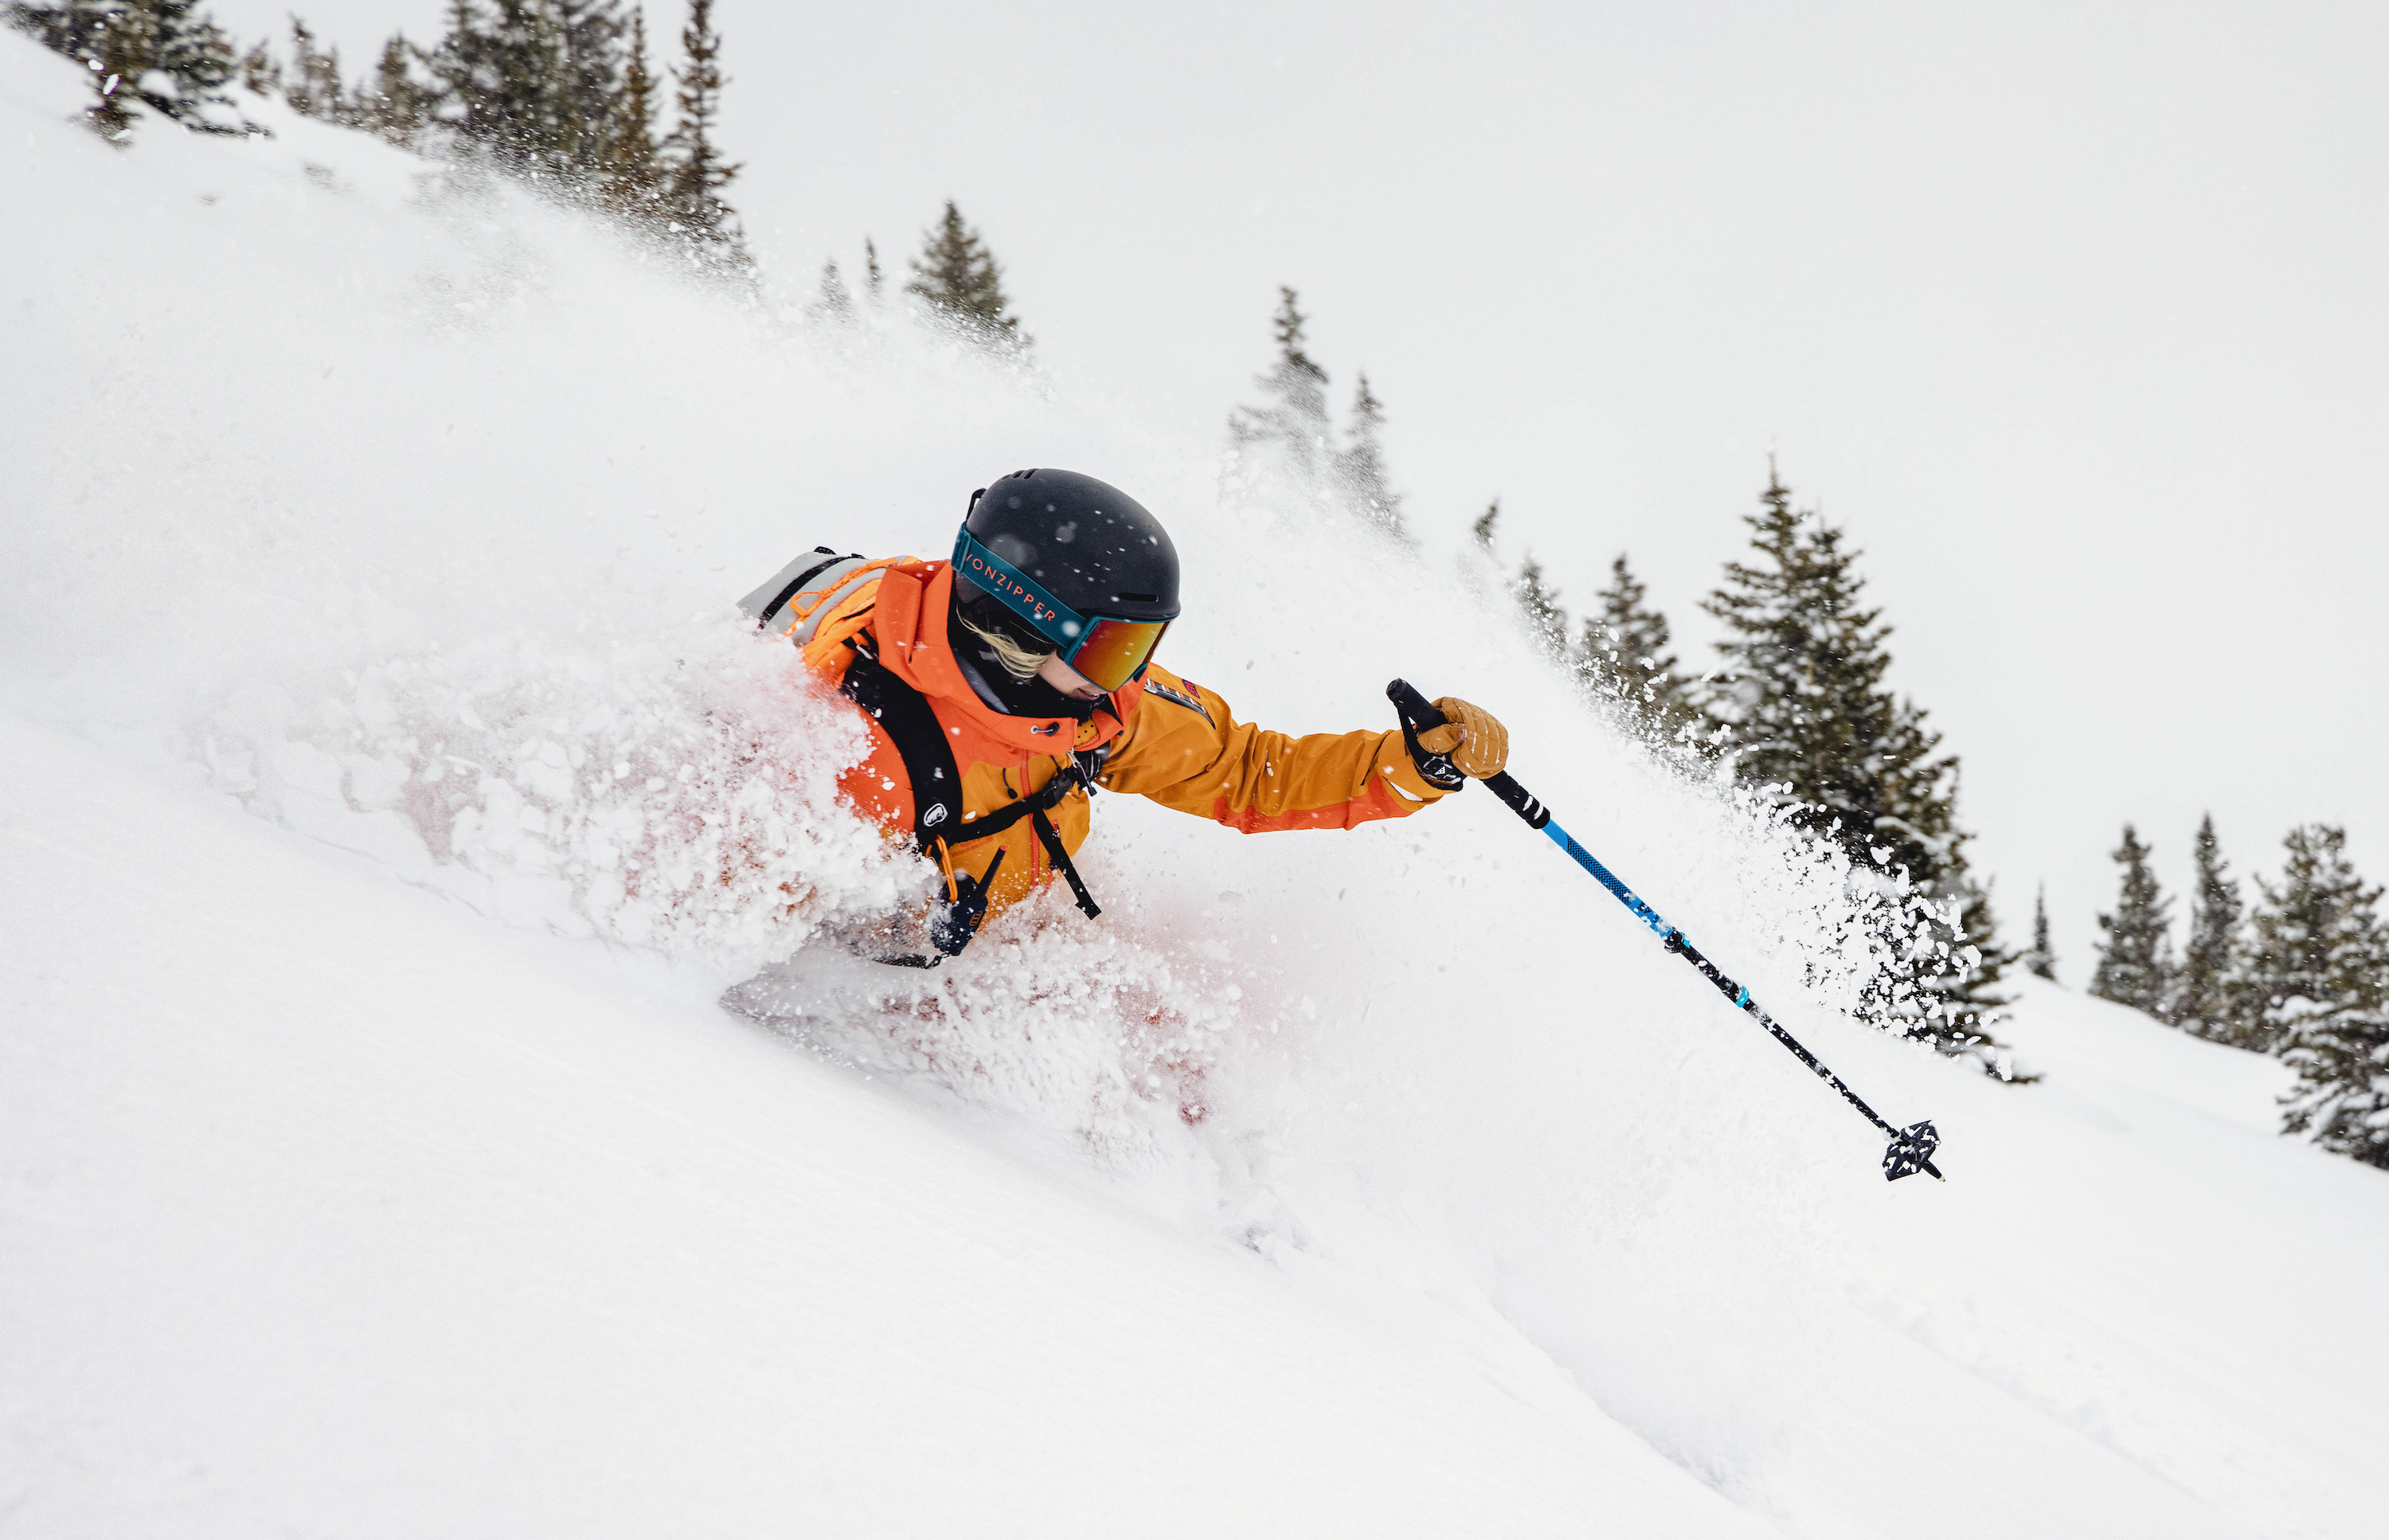 Restock Your Kit With the Backcountry Winter Gear Sale